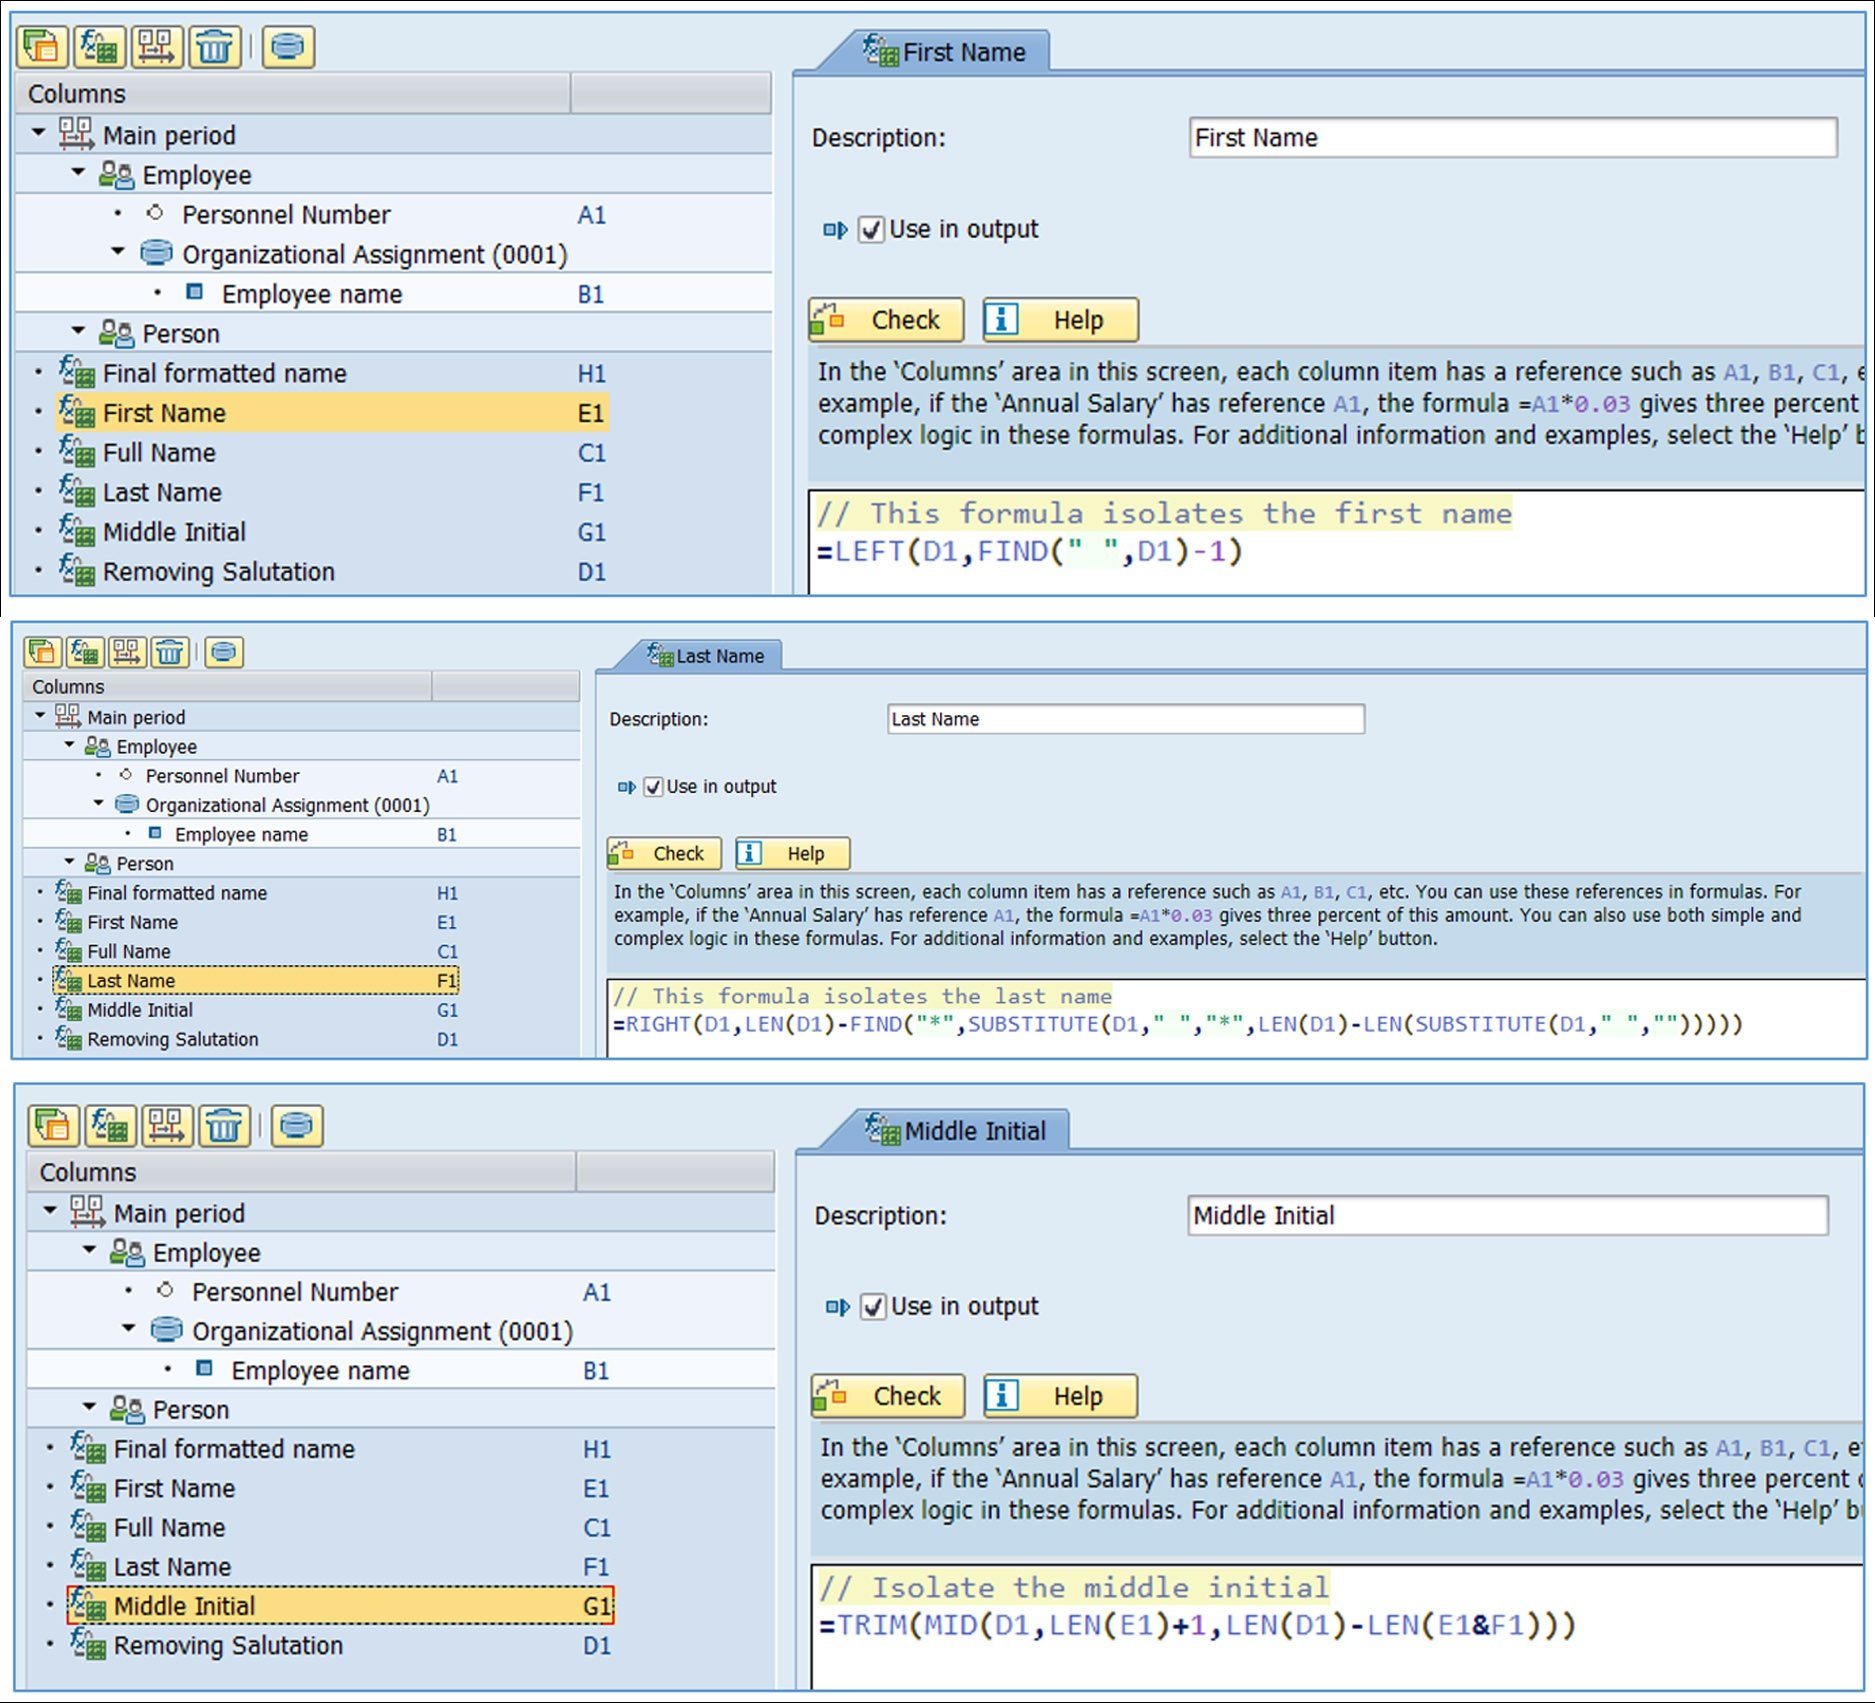 The power of Query Manager Formula Builder: find out more Easily produce reports specifically tailored to recipients’ needs  Query Manager from EPI-USE Labs is an exceptional product to report on data from all functional areas within SAP.  In addition to reporting on data that resides within SAP tables, Query Manager users can add their own columns to their reports, and fill those columns based on “formulas” they create.    The power of the Query Manager Formula Builder, powered by the custom language called LabsScript, incorporates thousands of commands and combinations of commands to allow reports to show SAP data exactly as required by the recipients. In its simplest form, it supports a vast majority of the syntax and function equivalents found in Excel, with some features that were changed or added for an enhanced user experience. Unlike in Excel, LabsScript is a compiled language which runs at near-native speeds, so the formulas users create don’t bog down the performance of their queries.  This blog post article illustrates just a few examples of the kinds of formulas that can be written within Query Manager.  Example 1. Writing formulas is simplified by using field labels within the Formula Builder. This very simple formula is adding D1 (Amount1) and F1 (Amount2). Screenshot1  Example 2.  Another very simple formula is to concatenate one or more text fields together.  This example concatenates the Personnel Area and the Personnel Subarea into a single column:Screenshot2  Sample report output:Screenshot3  Example 3. Commonly used formulas are ones that make a decision in order to produce results. The IF and IFS statements make these types of formulas easy to create:  This formula will highlight when two fields from different parts of SAP do not equal each other:Screenshot4  Use the IFS statement when the decision is multiple levels deep:Screenshot5  Example 4. Taking formulas to the next level, we can start to create some fantastic reports. Case in point: The manager of each Organizational Unit in the company wants a report of the gross pay amounts per month for a given year to track variances in pay. This can be accomplished in Query Manager with a couple of formulas.  The first one will create a column that holds values for each month of the year. A little extra logic formats this field as  “01 – Jan”, “02 – Feb”, “03 – Mar” etc. for clarity and for sorting purposes:Screenshot6  The second formula creates the total gross pay, subtotaled by Org Unit and by month. Also, this formula is using the output of the earlier formula as one of its parameters. Query Manager knows to execute the first formula before the second:Screenshot7  Here’s the final report: Screenshot8  Example 5: The final example executes several formulas to do some intricate text field manipulation. This was a real example given to me by one of our EPI-USE customers that was required for one of their reports. They had a name field that was showing by default on their report in the format of Mr. Paul J. Lamonica. The requirement was to reformat this name as Lamonica, Paul J. Now, I’m not ashamed to admit that my Excel formula skills are medium at best. But, what I am able to do quite well is internet searches when I need assistance. That’s exactly what I did to solve this issue. I simply searched on the internet how to do the actions I needed to perform to reformat the name in the required format. When I found what I was looking for, I copied and pasted the results of my search into the Formula Builder within Query Manager. And just like that, I solved the issue.  The result was the following three formulas. I broke it up into smaller sections of work for clarity, but maybe a highly skilled Excel expert could do this all in one formula.  Formula 1: Strip off the salutation:Screenshot9  Formula 2, 3, and 4: Isolate the first name, last name, and middle initial:Screenshot10  Formula 5: With all the parts of the name now created, bring it all together using a shortcut for the CONCATENATE statement:Formula 5: With all the parts of the name now created, bring it all together using a shortcut for the CONCATENATE statement:  Here is the final report. This example shows the individual parts of the name on the report, but these can optionally be removed, so only the end result of all the formulas appears on the output.   If you don’t understand all the commands used in these formulas, guess what, neither do I. This is just a great example of getting the syntax of the formulas from internet searches, and using the results within the Formula Builder in Query Manager. Formatting in field name  In Summary These examples are only a very small sample of the kinds of things that can be done by creating formulas in EPI-USE’s Query Manager. And, the best part…you don’t have to be a super technical person to do some amazing things with formulas. Formulas (and their language, LabsScript) were created to be used by all types and levels of SAP personnel. From the most experienced ABAP developer to the newly hired functional analyst, formulas can be used by everyone to produce reports specifically tailored to the needs of the recipients. 